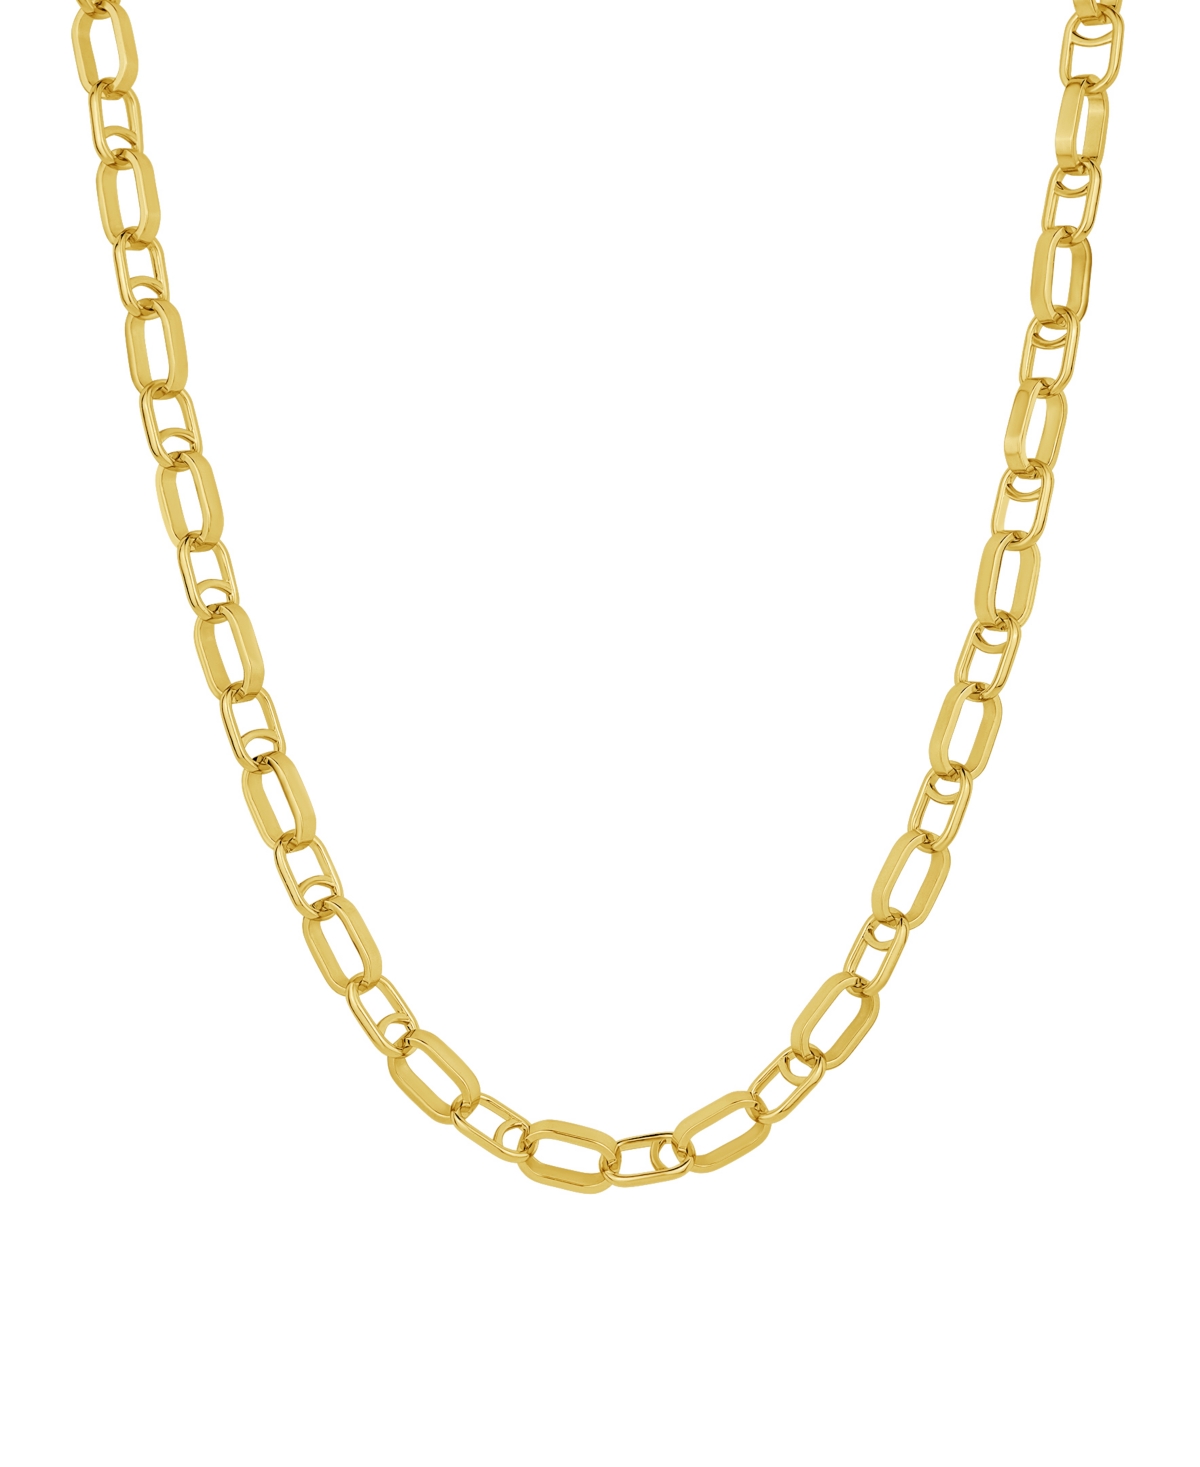 18K Gold Plated or Silver Plated Link Chain Necklace - Gold